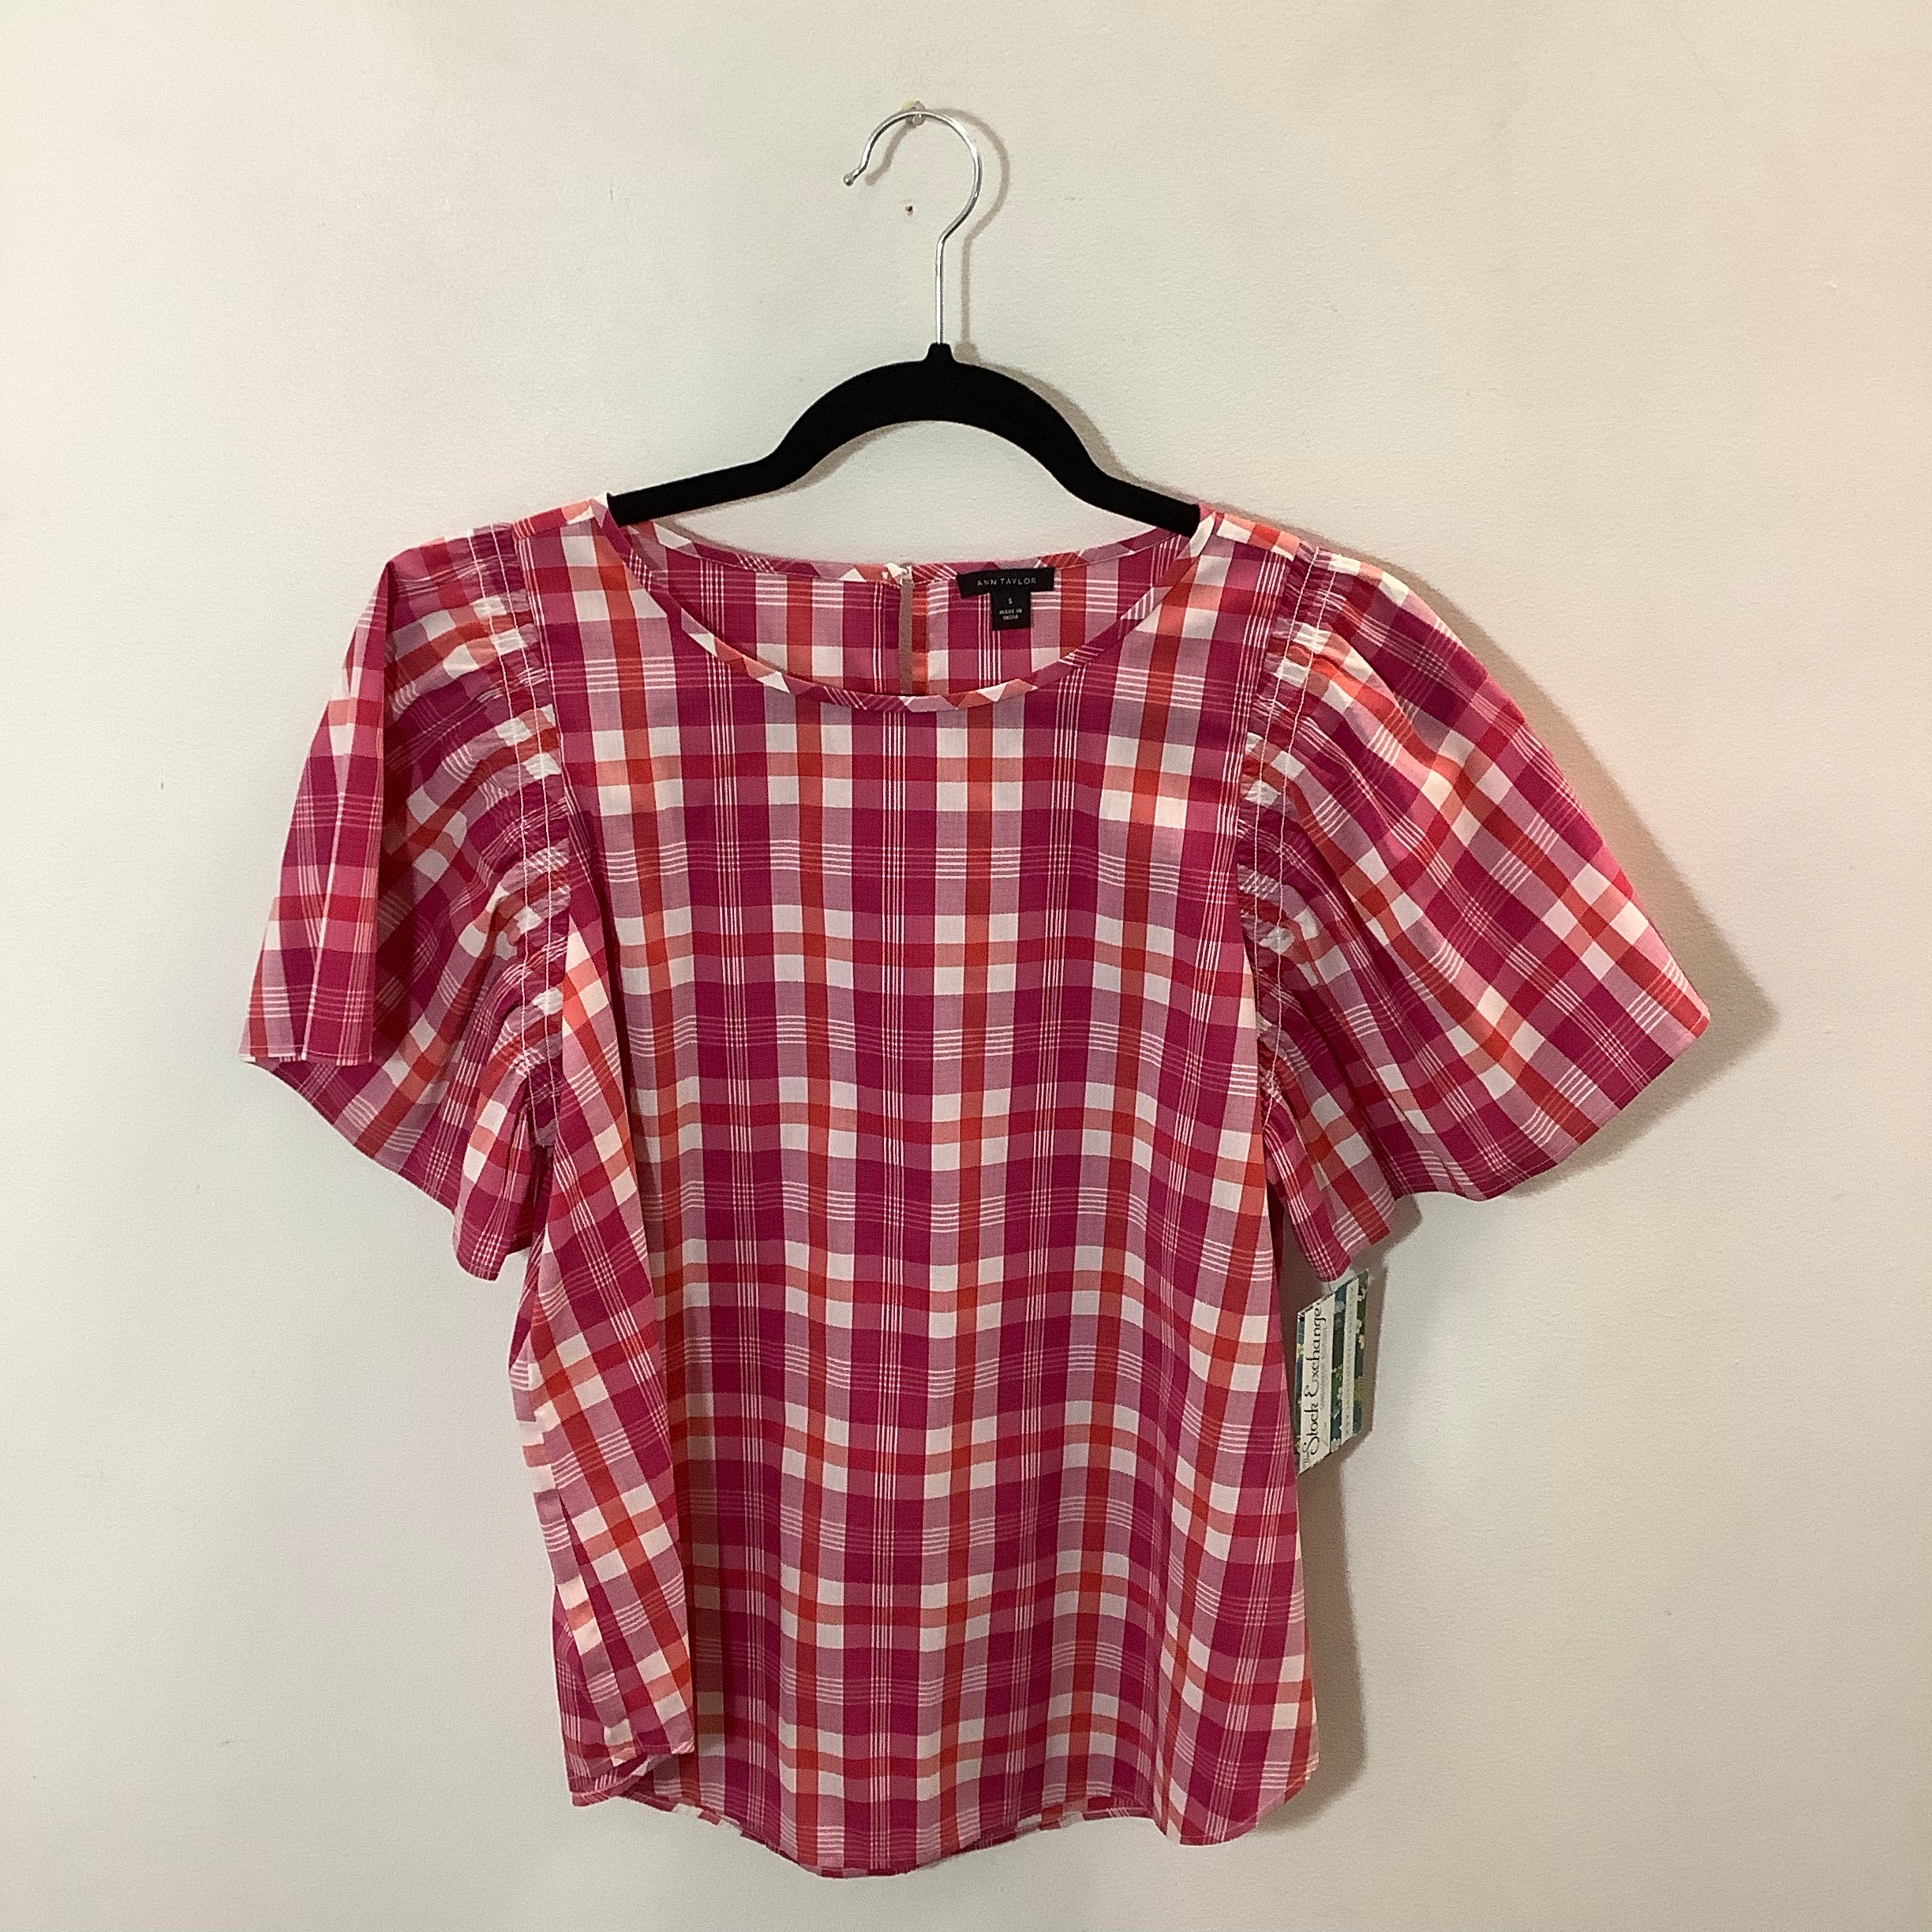 Ann Taylor Pink Top Size Small